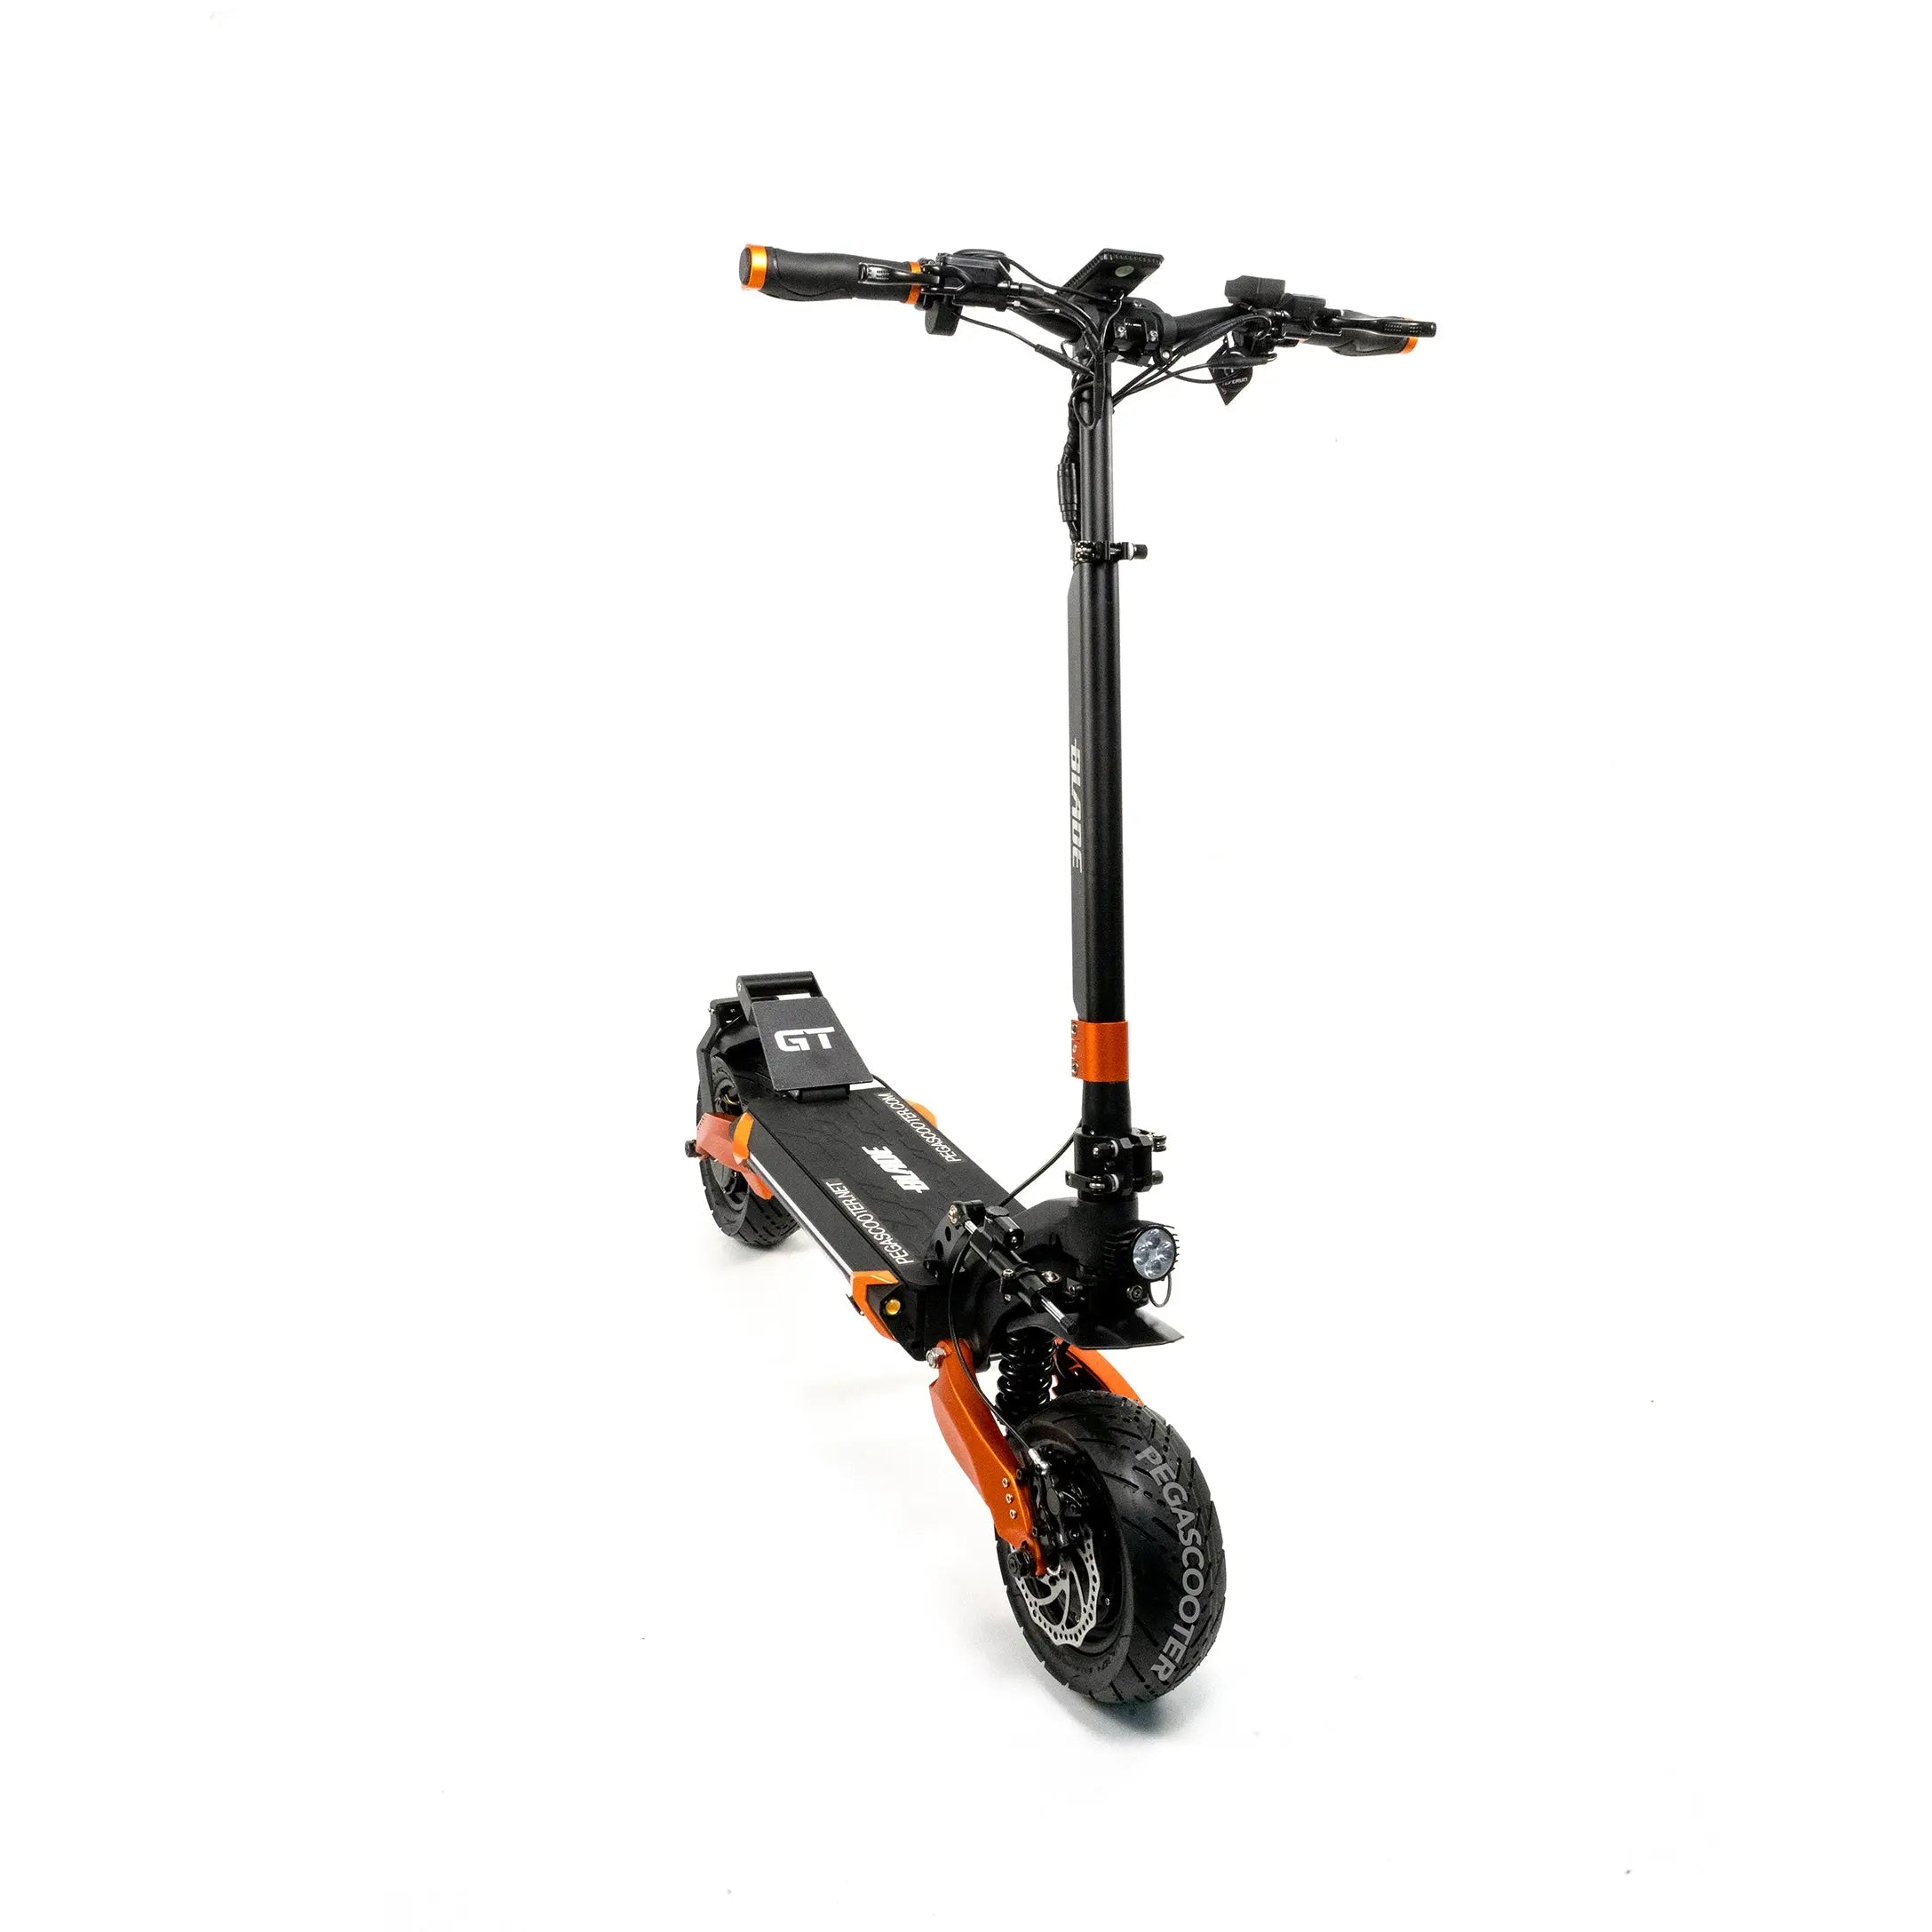 » Teverun Blade GT+ Electric Scooter